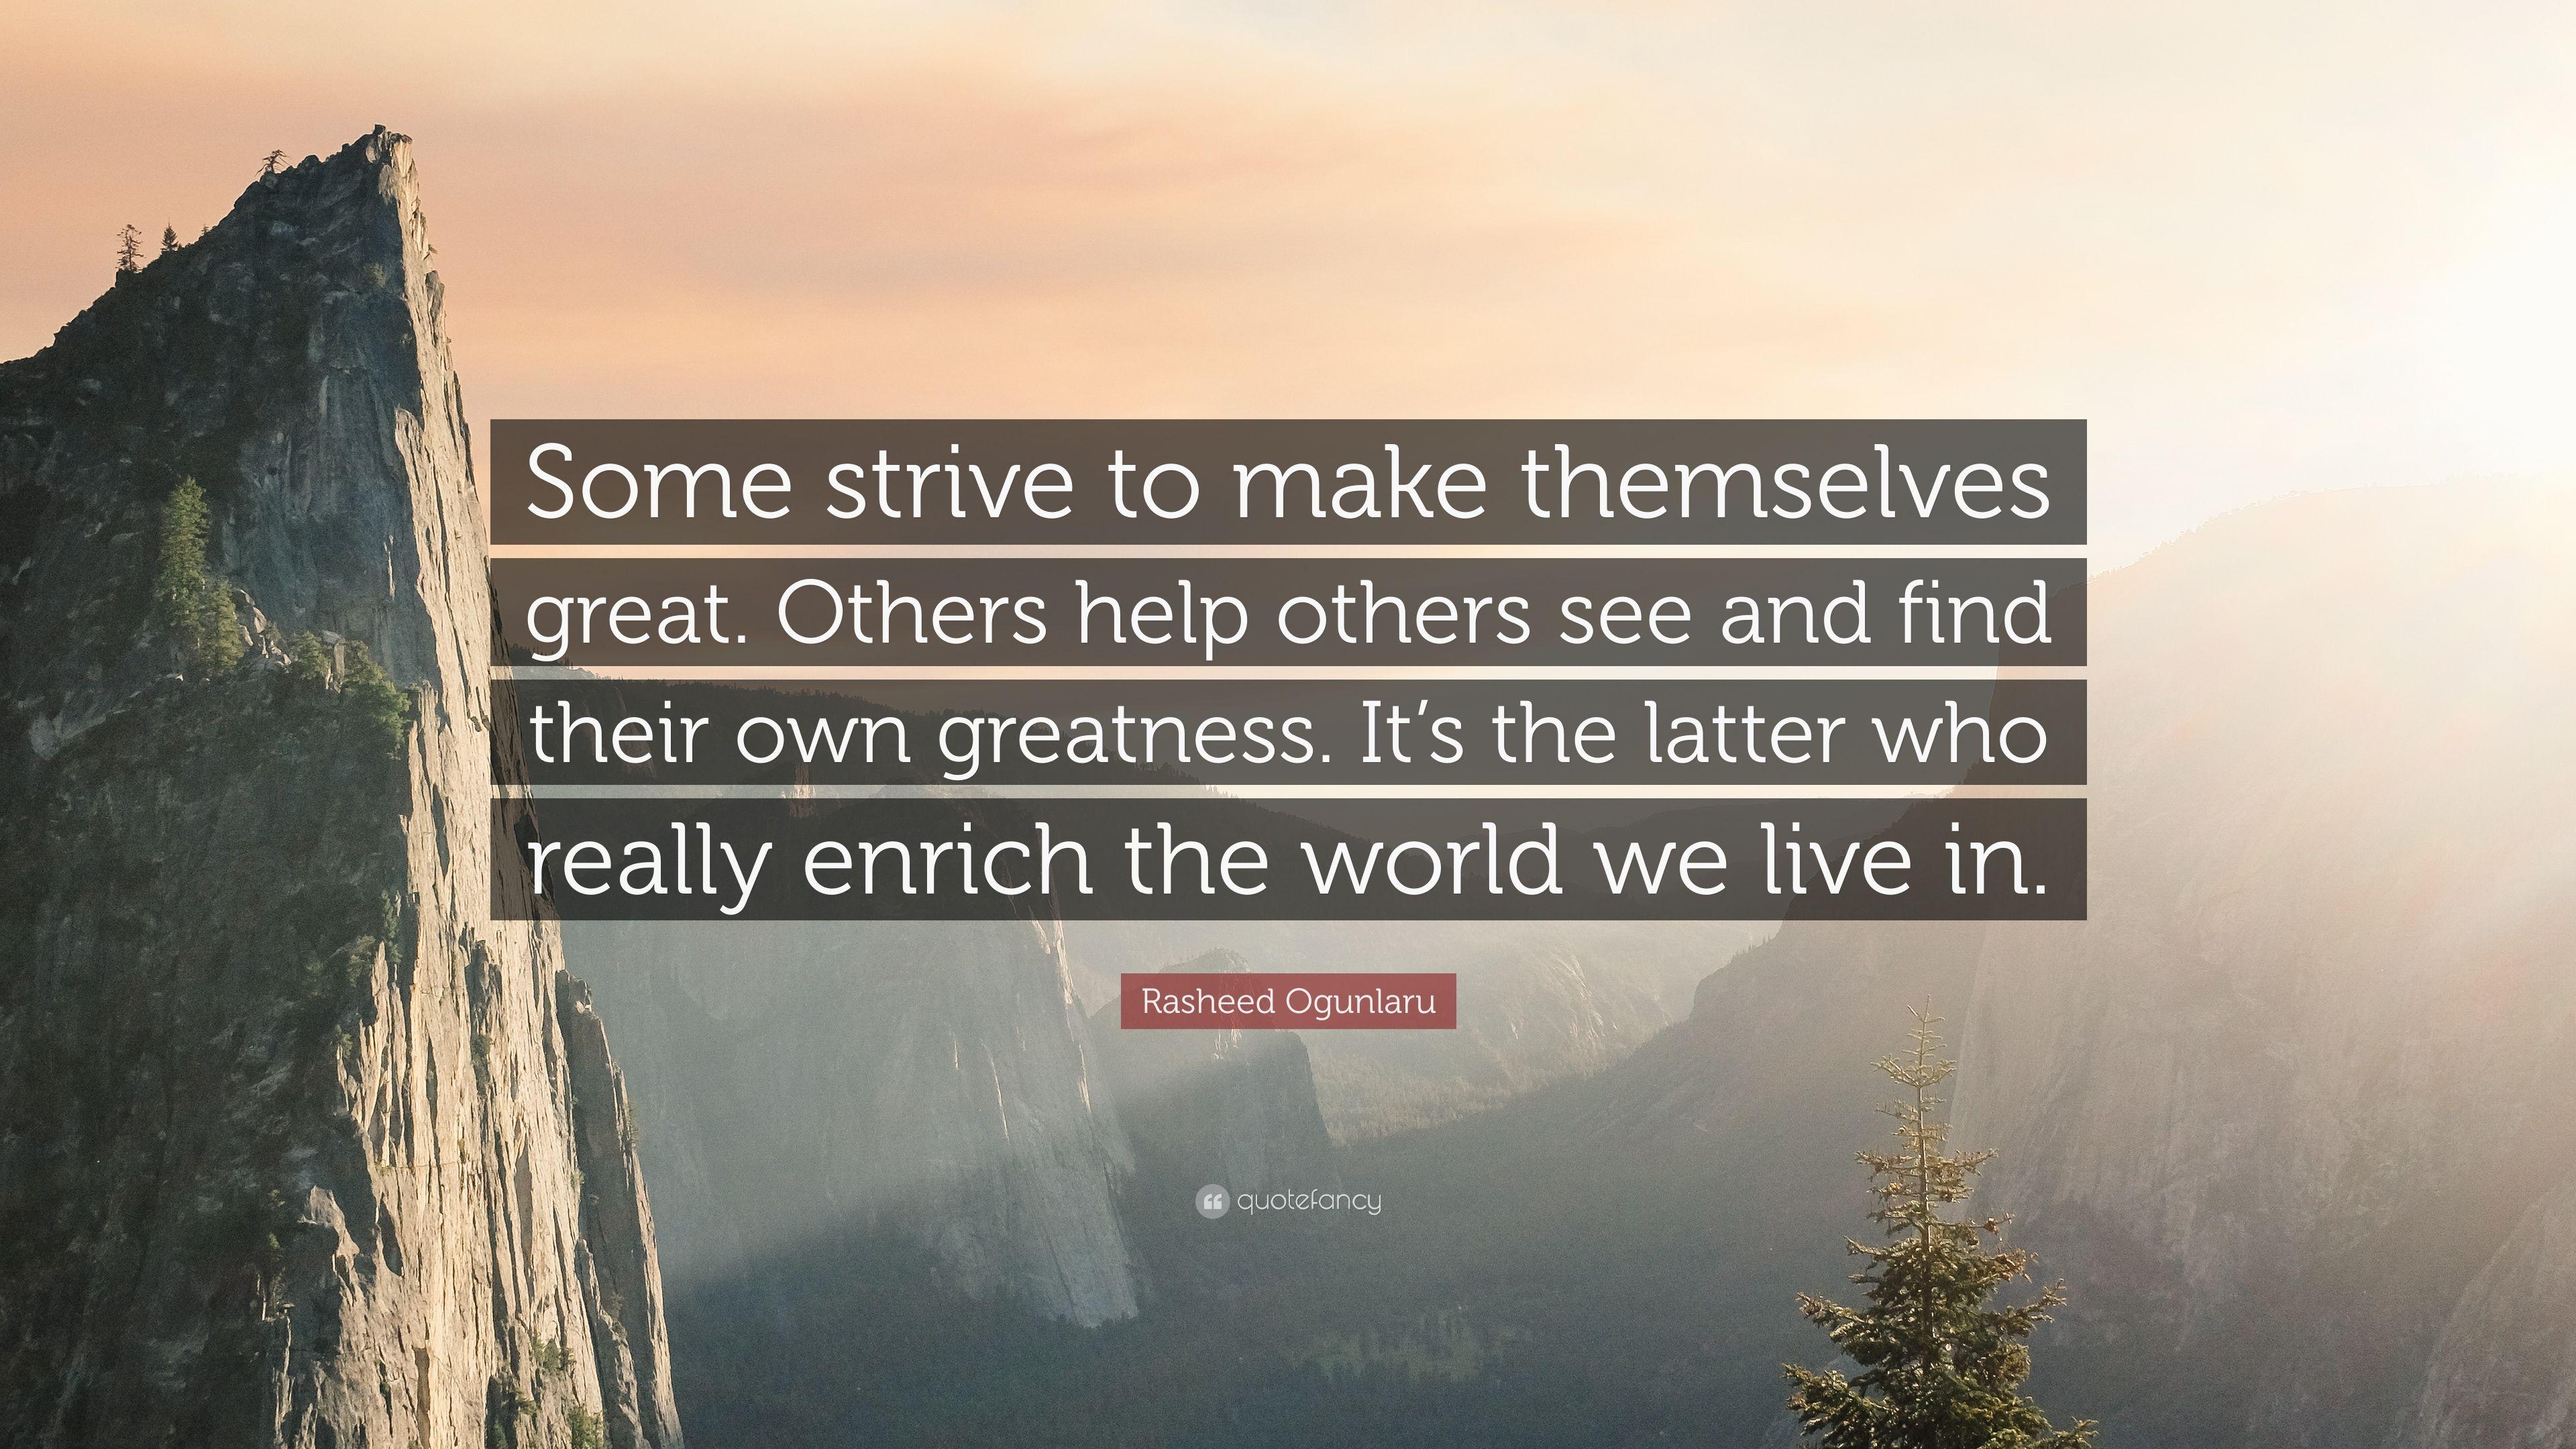 Rasheed Ogunlaru Quote: “Some strive to make themselves great